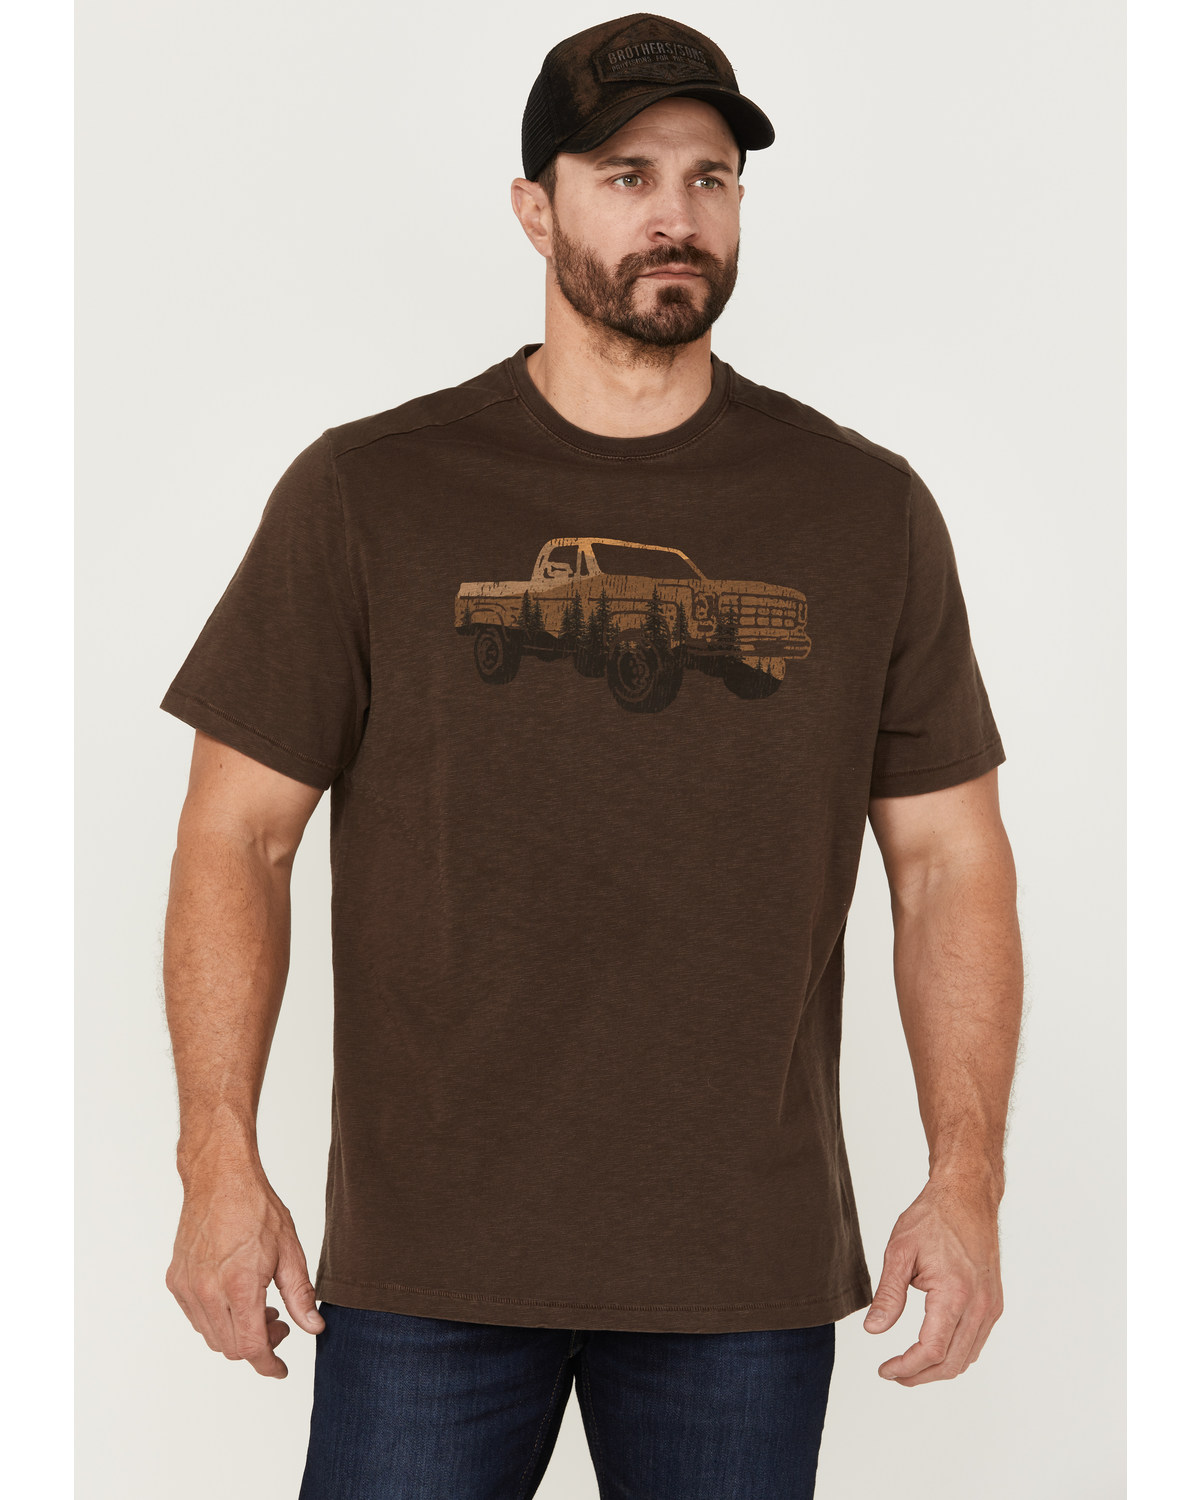 Brothers and Sons Men's Pickup Truck Reflection Graphic T-Shirt